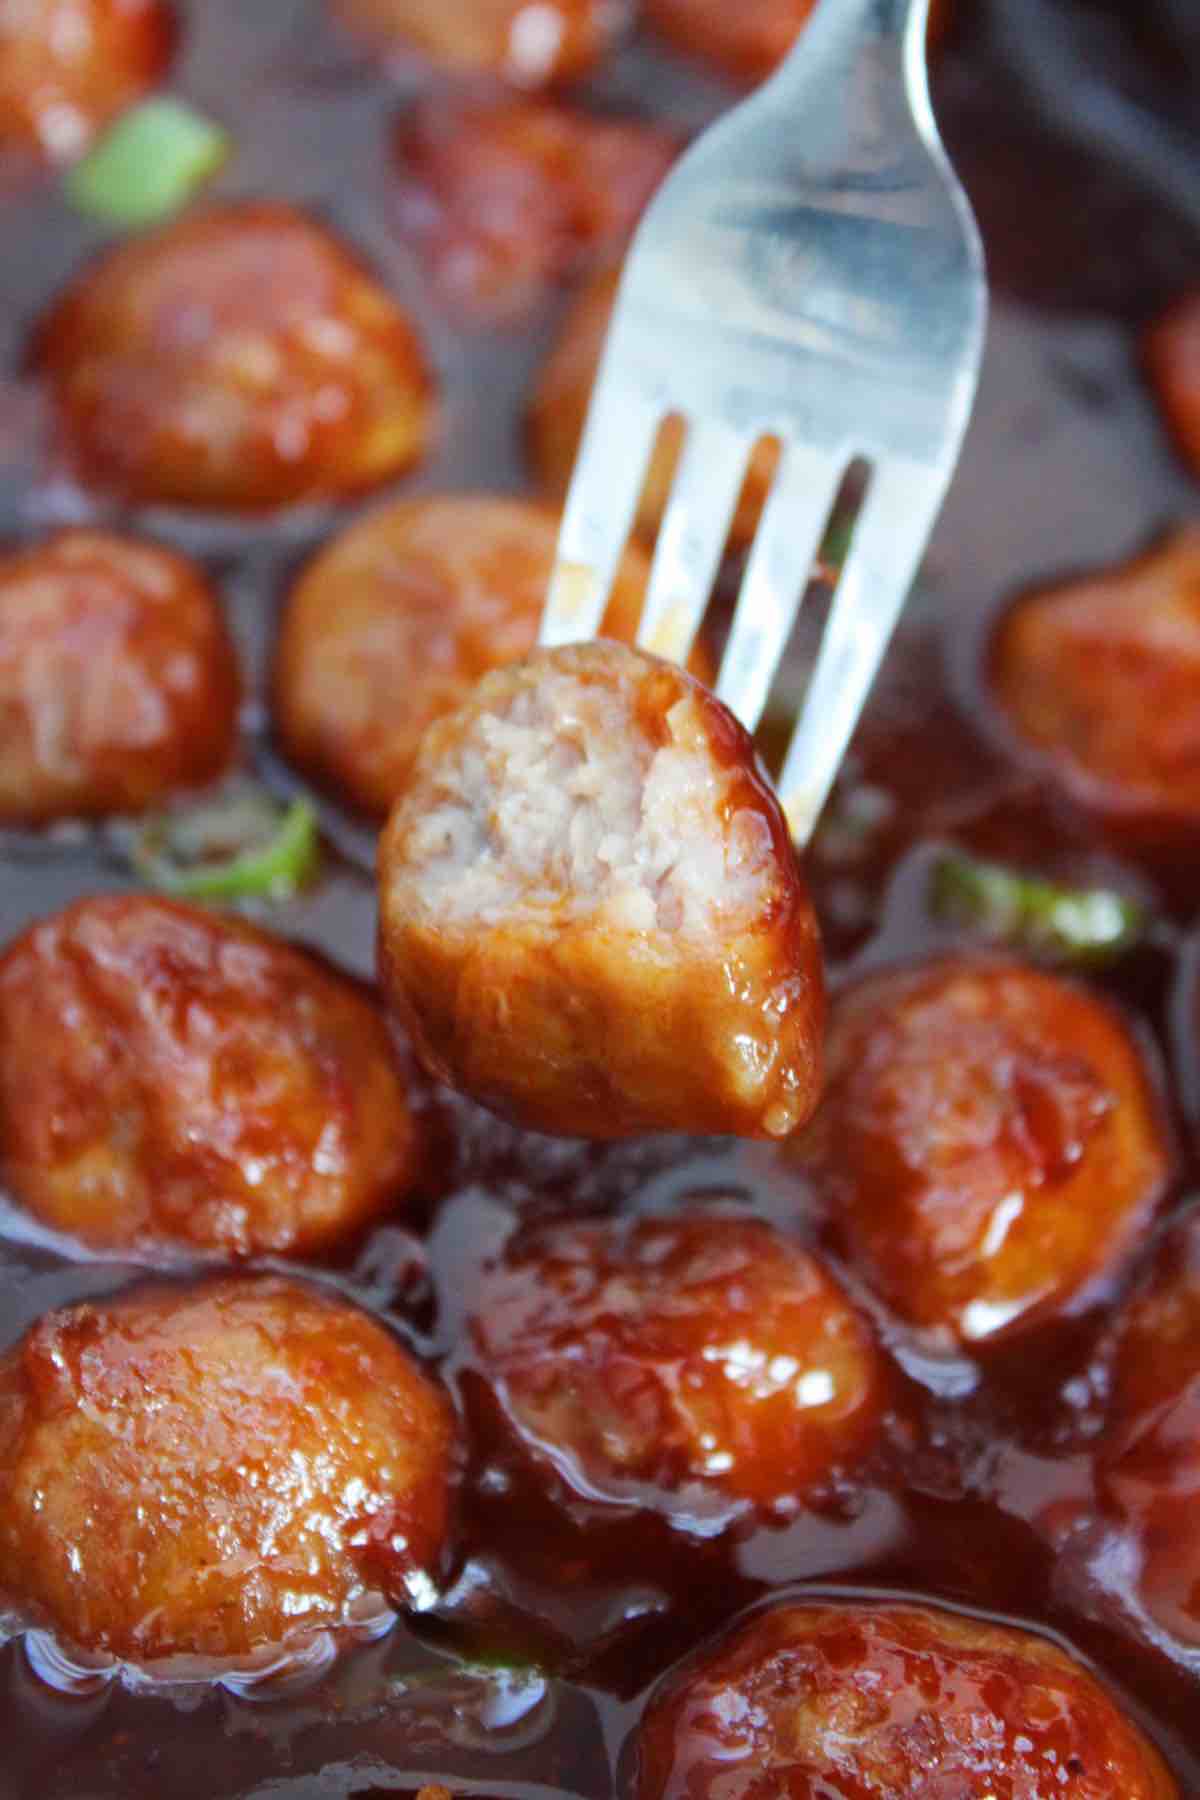 Candied, beer braised kielbasa is topped with green scallions then served as shown in the photo.